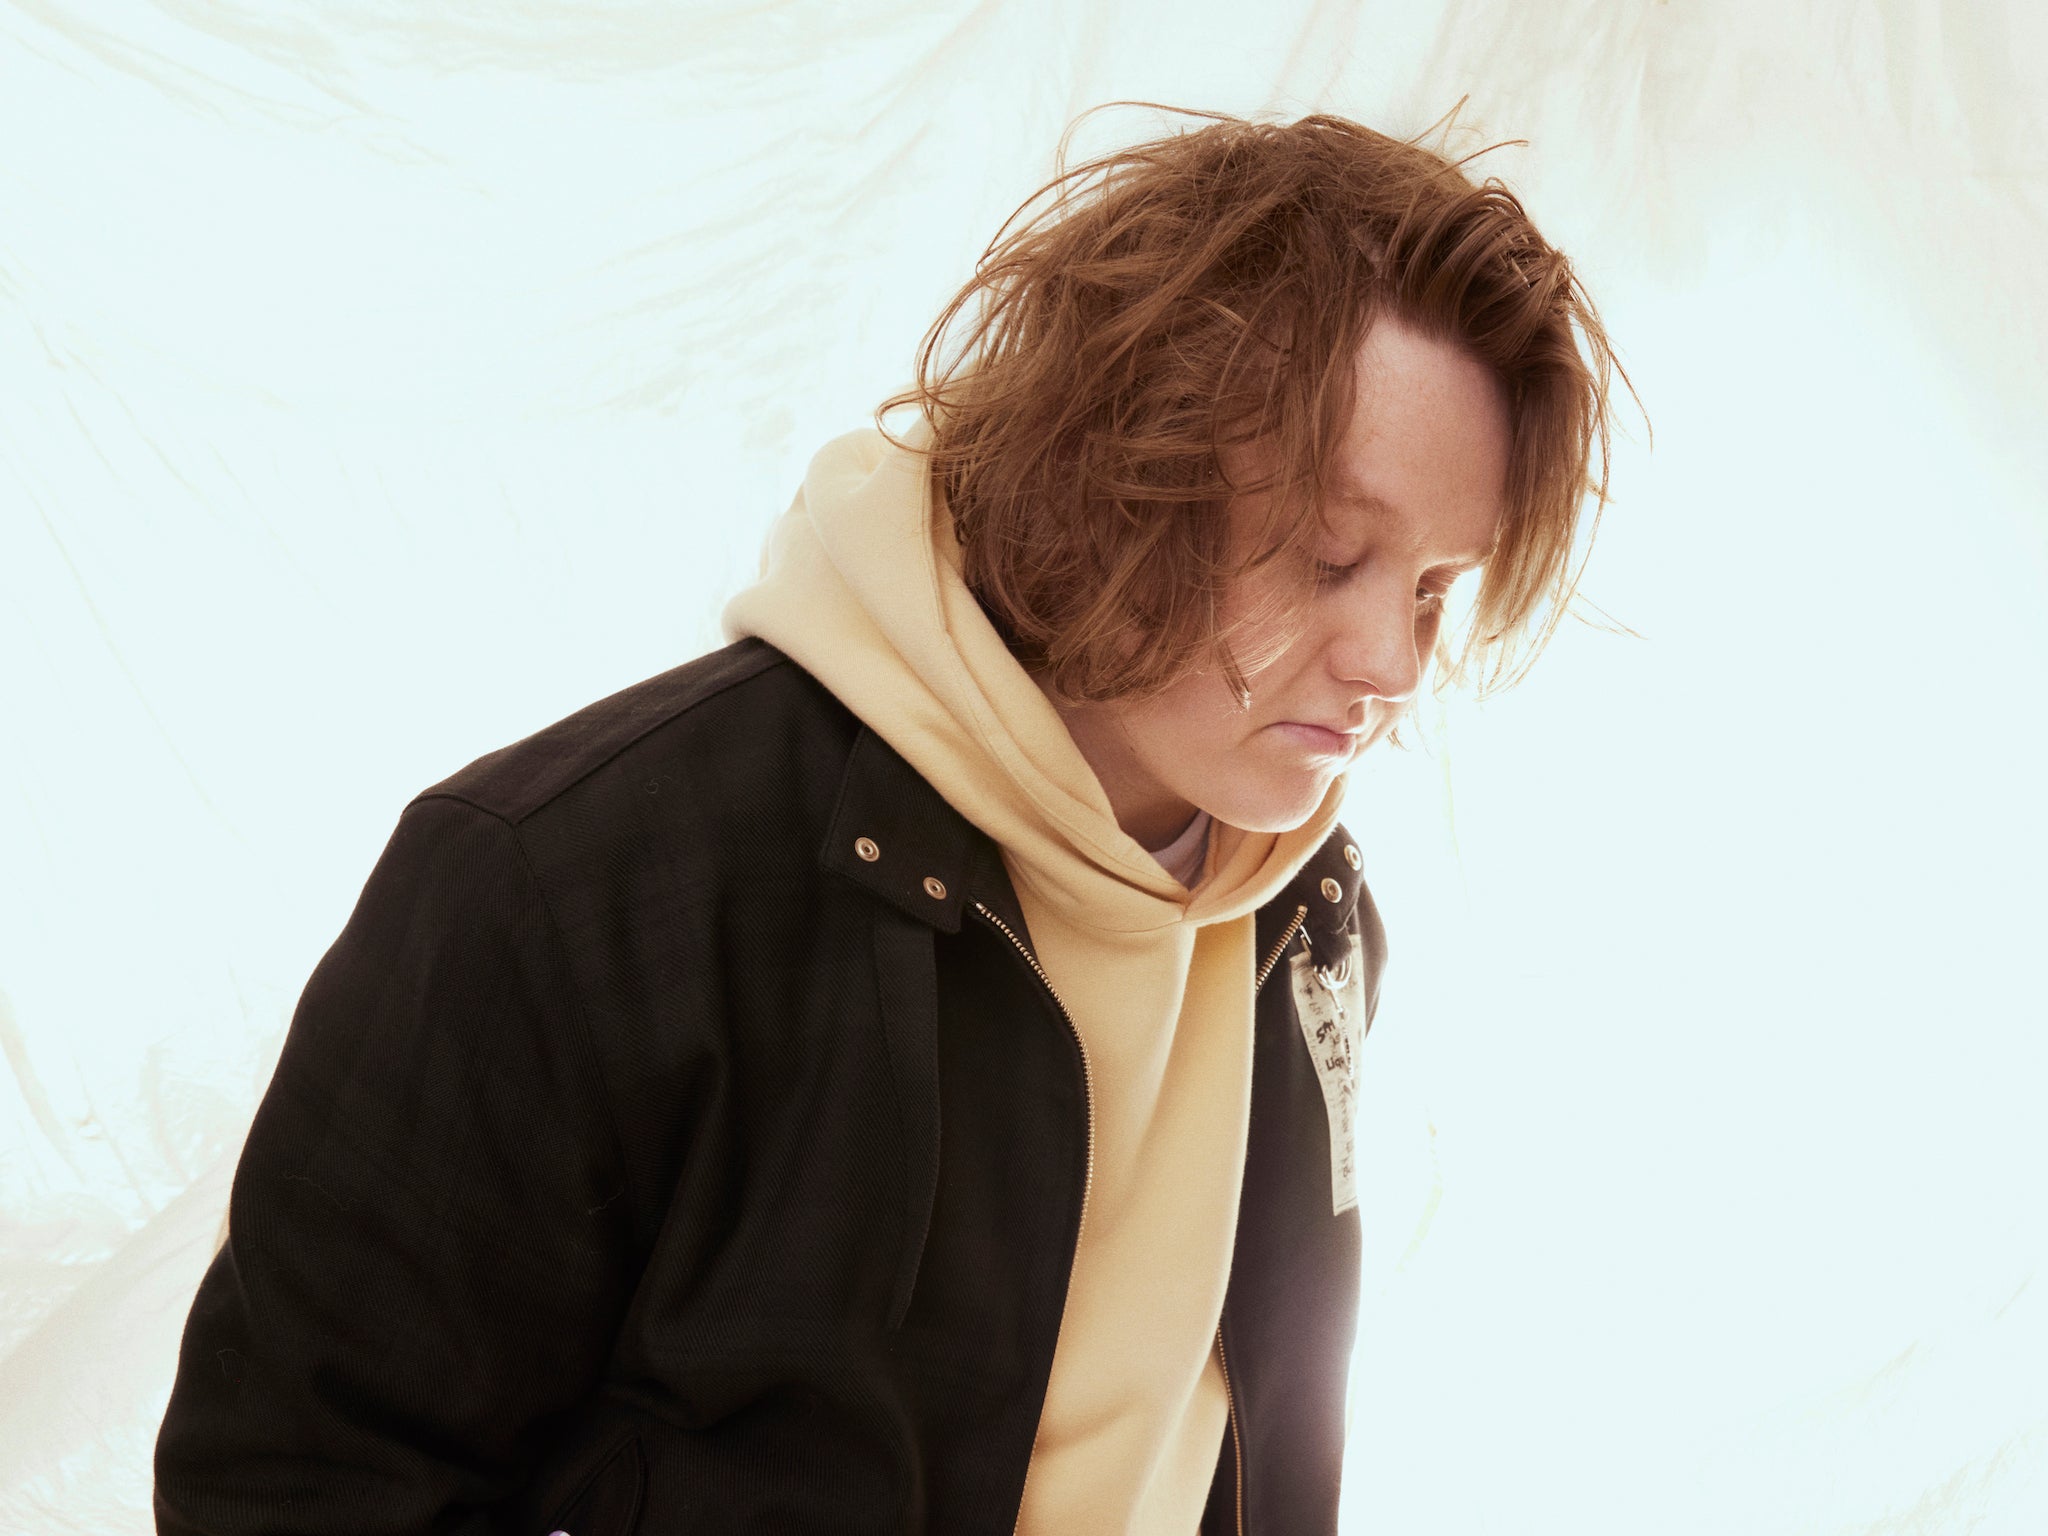 Lewis Capaldi returns with his second album ‘Broken by Desire to Be Heavenly Sent’ in May